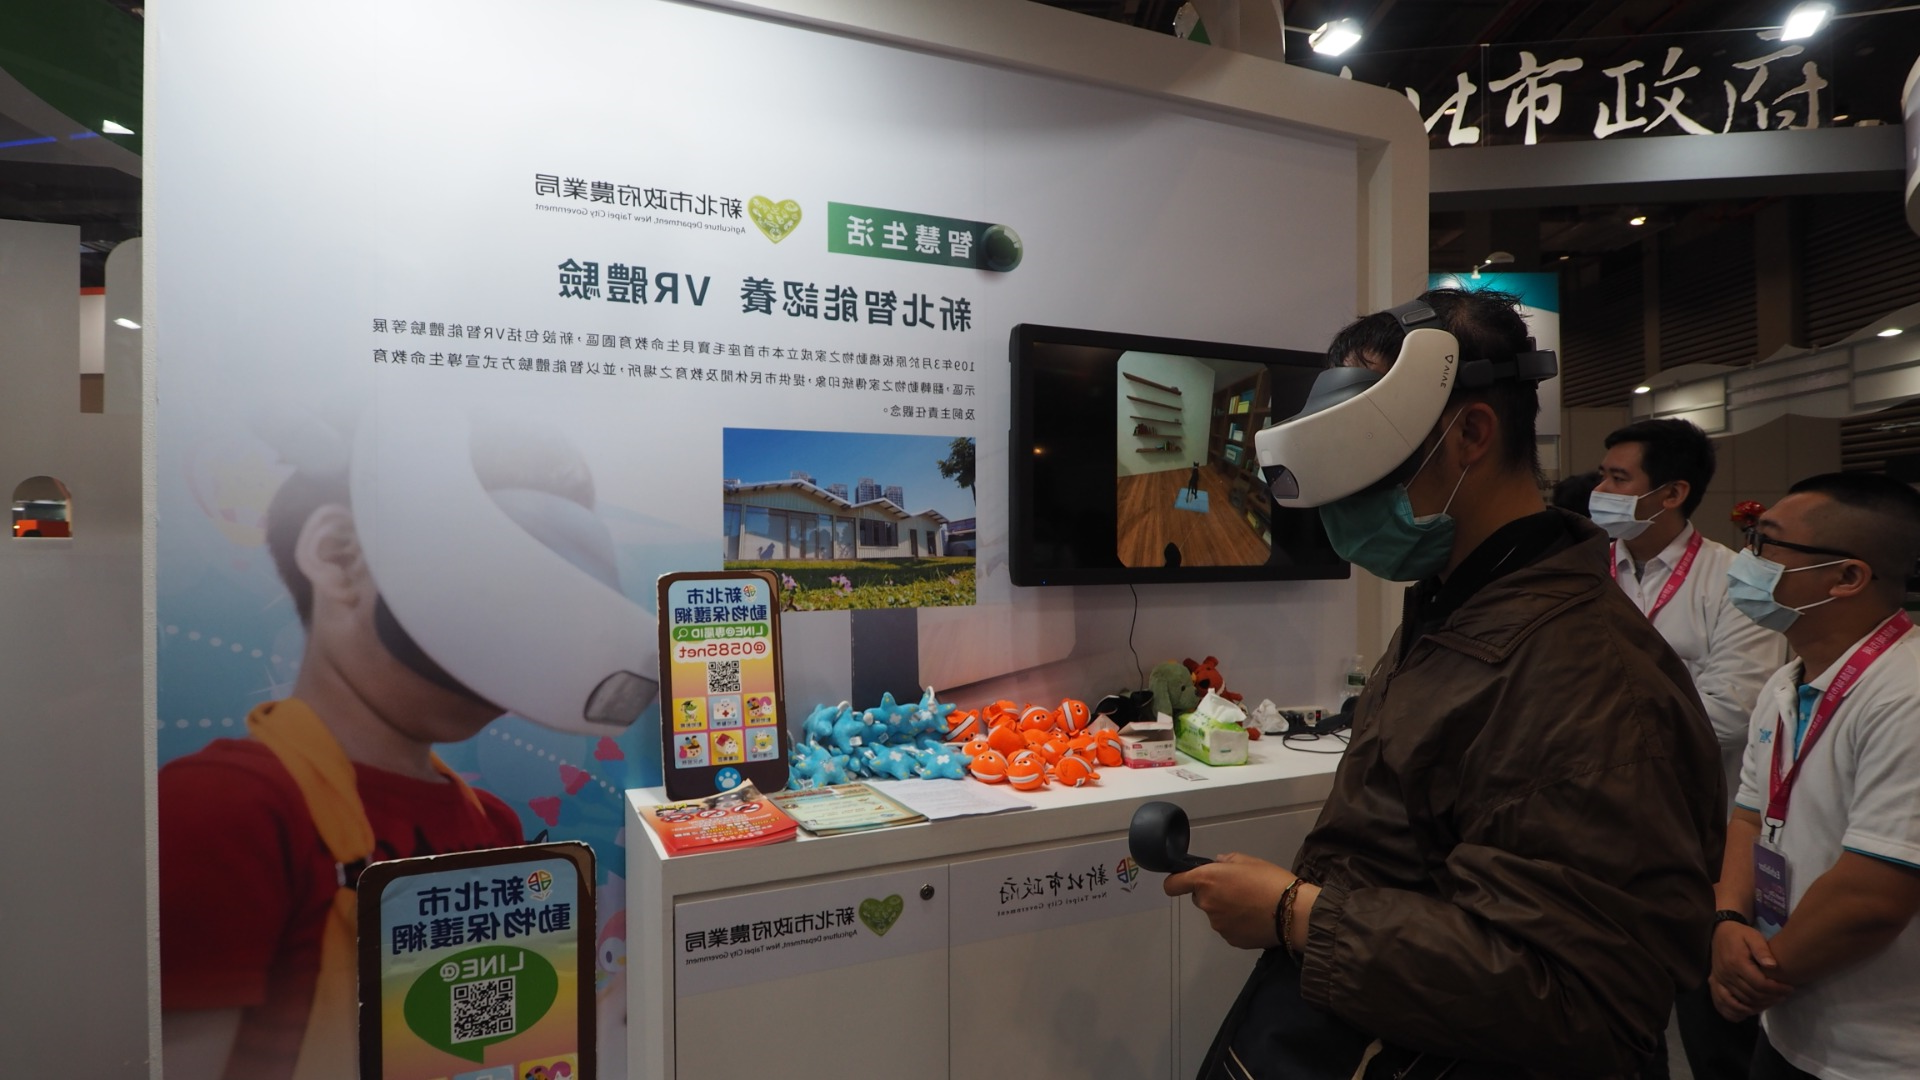 VR virtual reality applied to physical exhibition: 2021 Smart City Exhibition